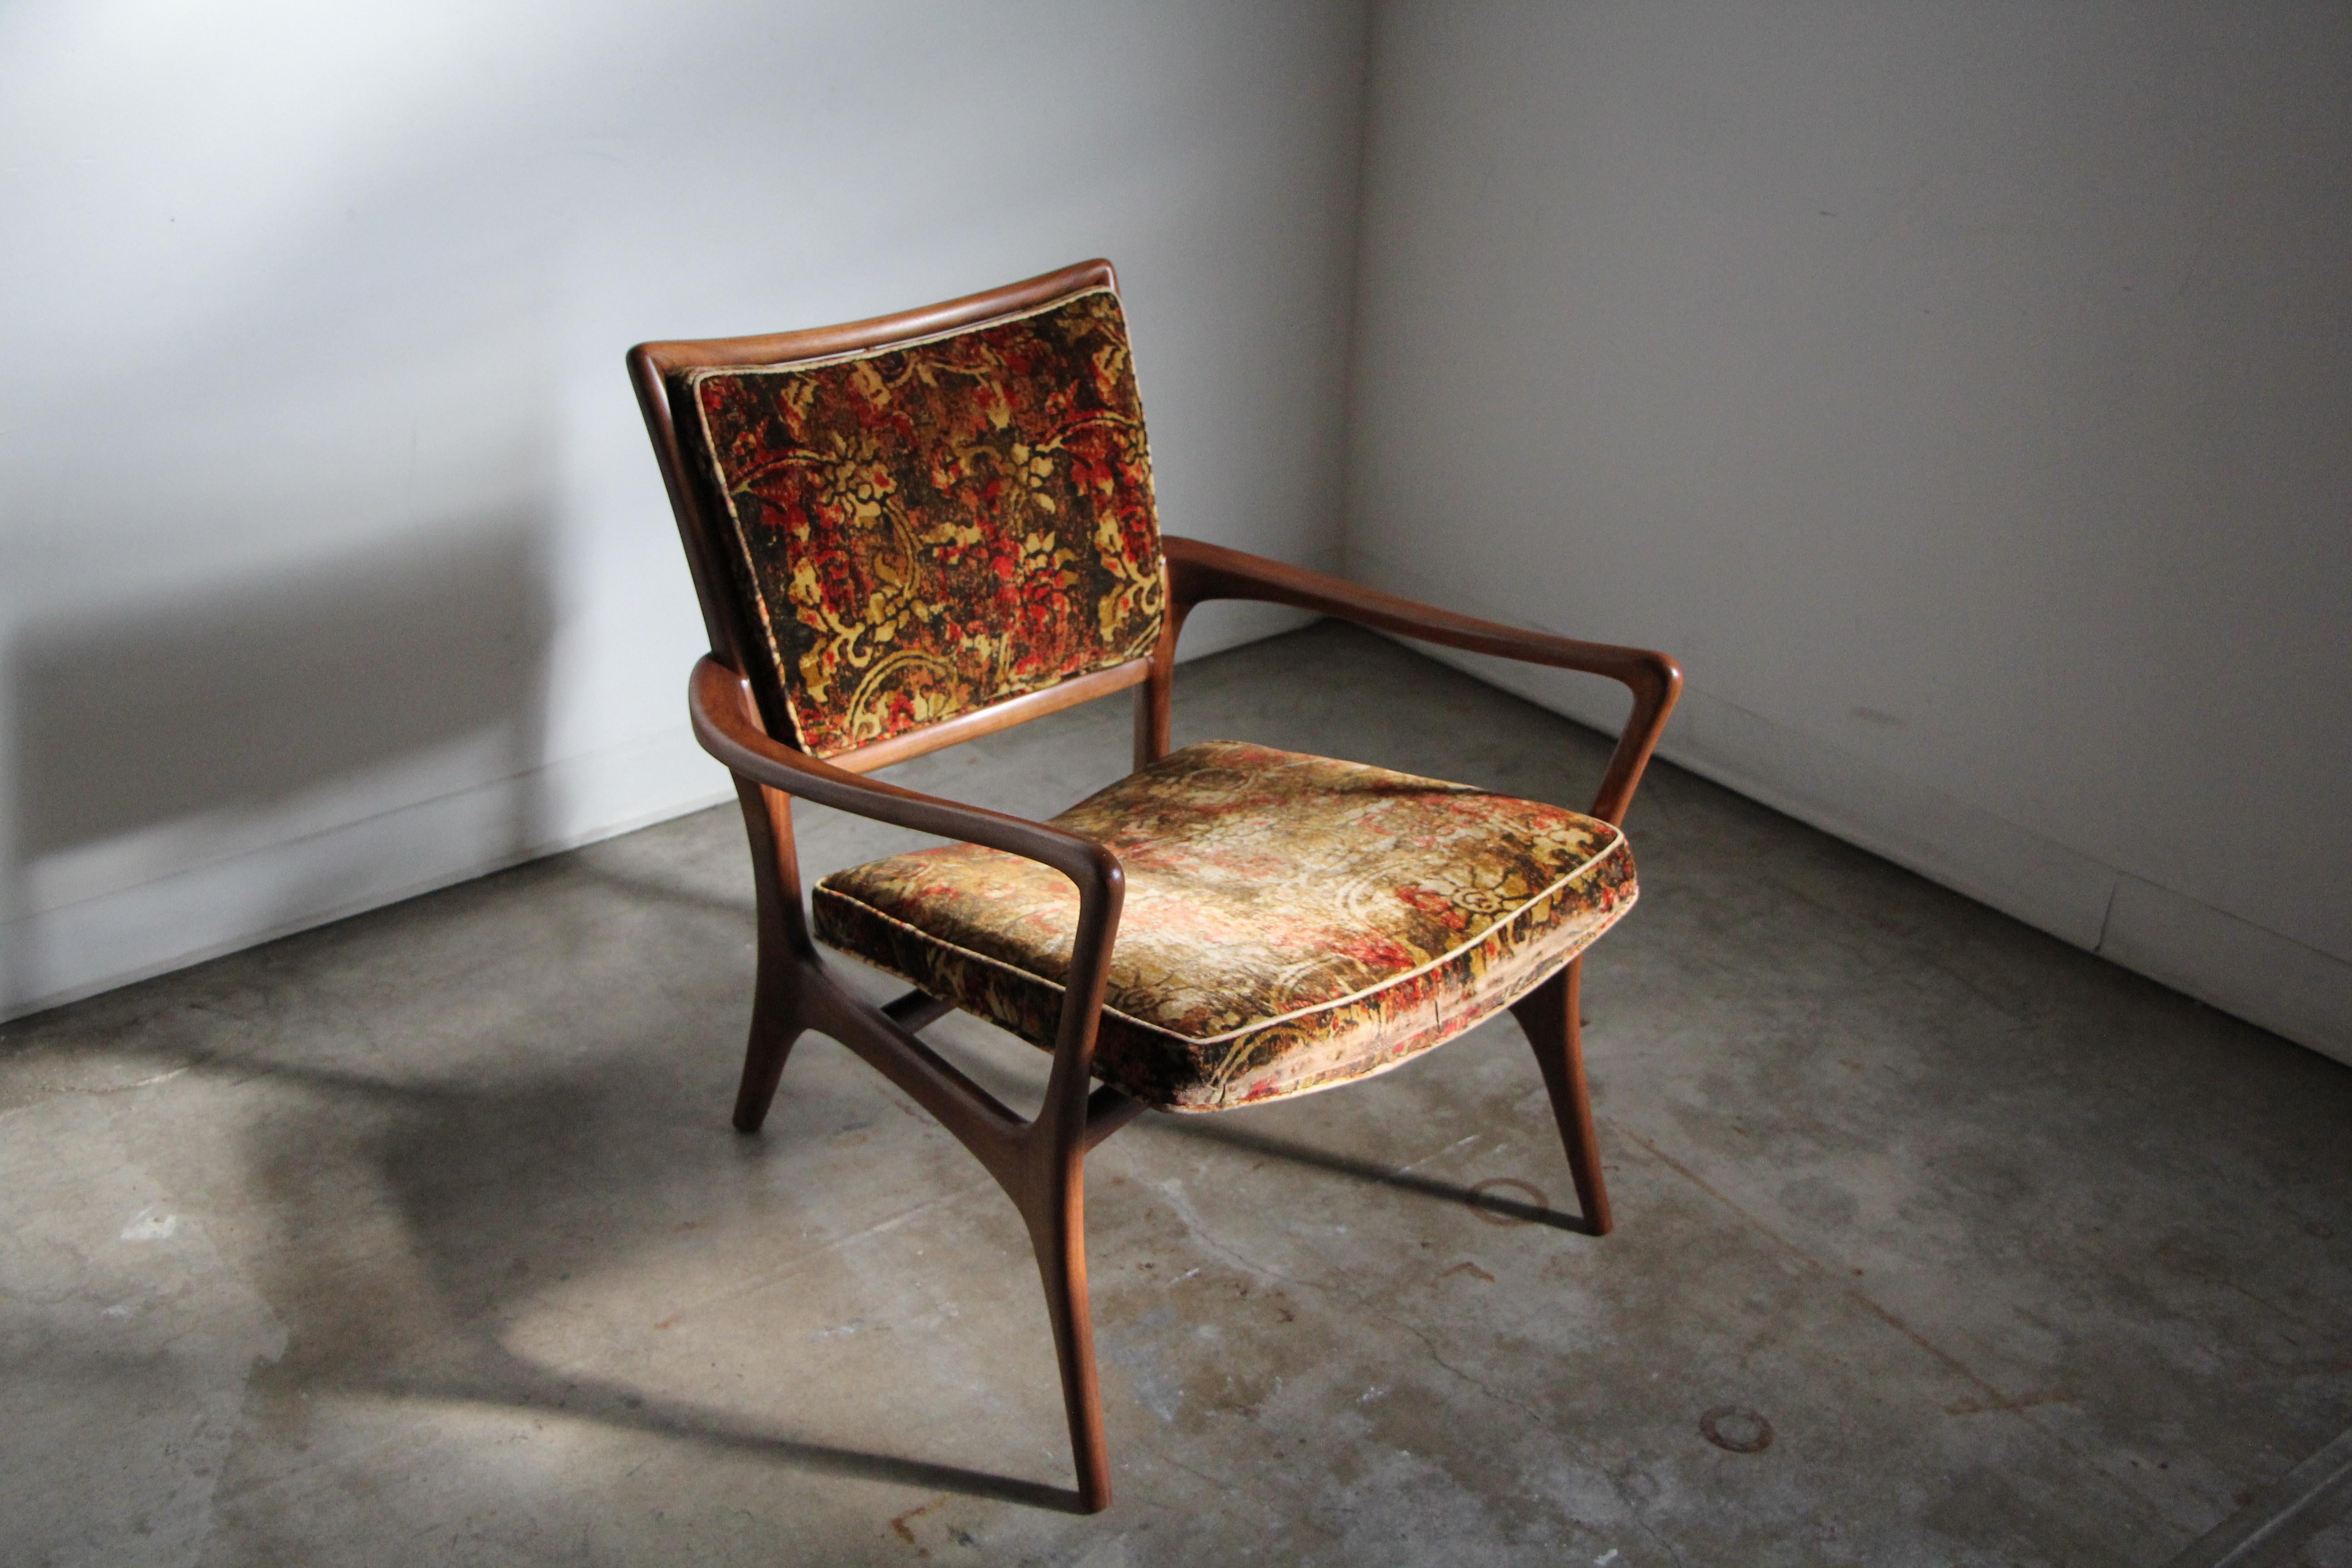 Very Rare Model 175-C Sculptured Lounge Armchair by Vladimir Kagan, c 1950s For Sale 4